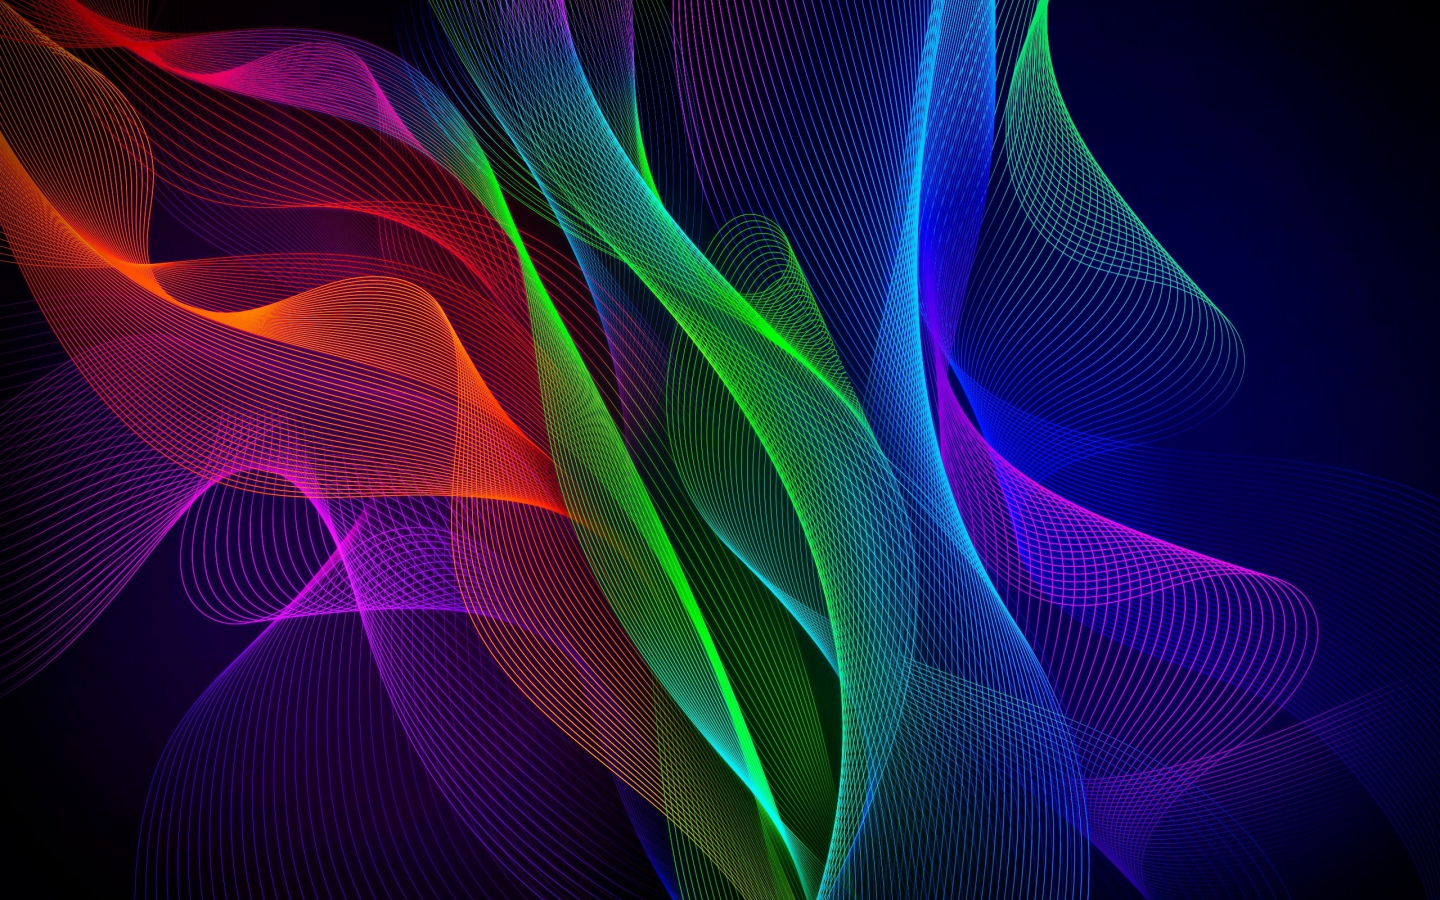 Download 1440x900 Wallpaper Waves Colorful Razer Phone Stock Widescreen 16 10 Widescreen 1440x900 Hd Image Background 5565